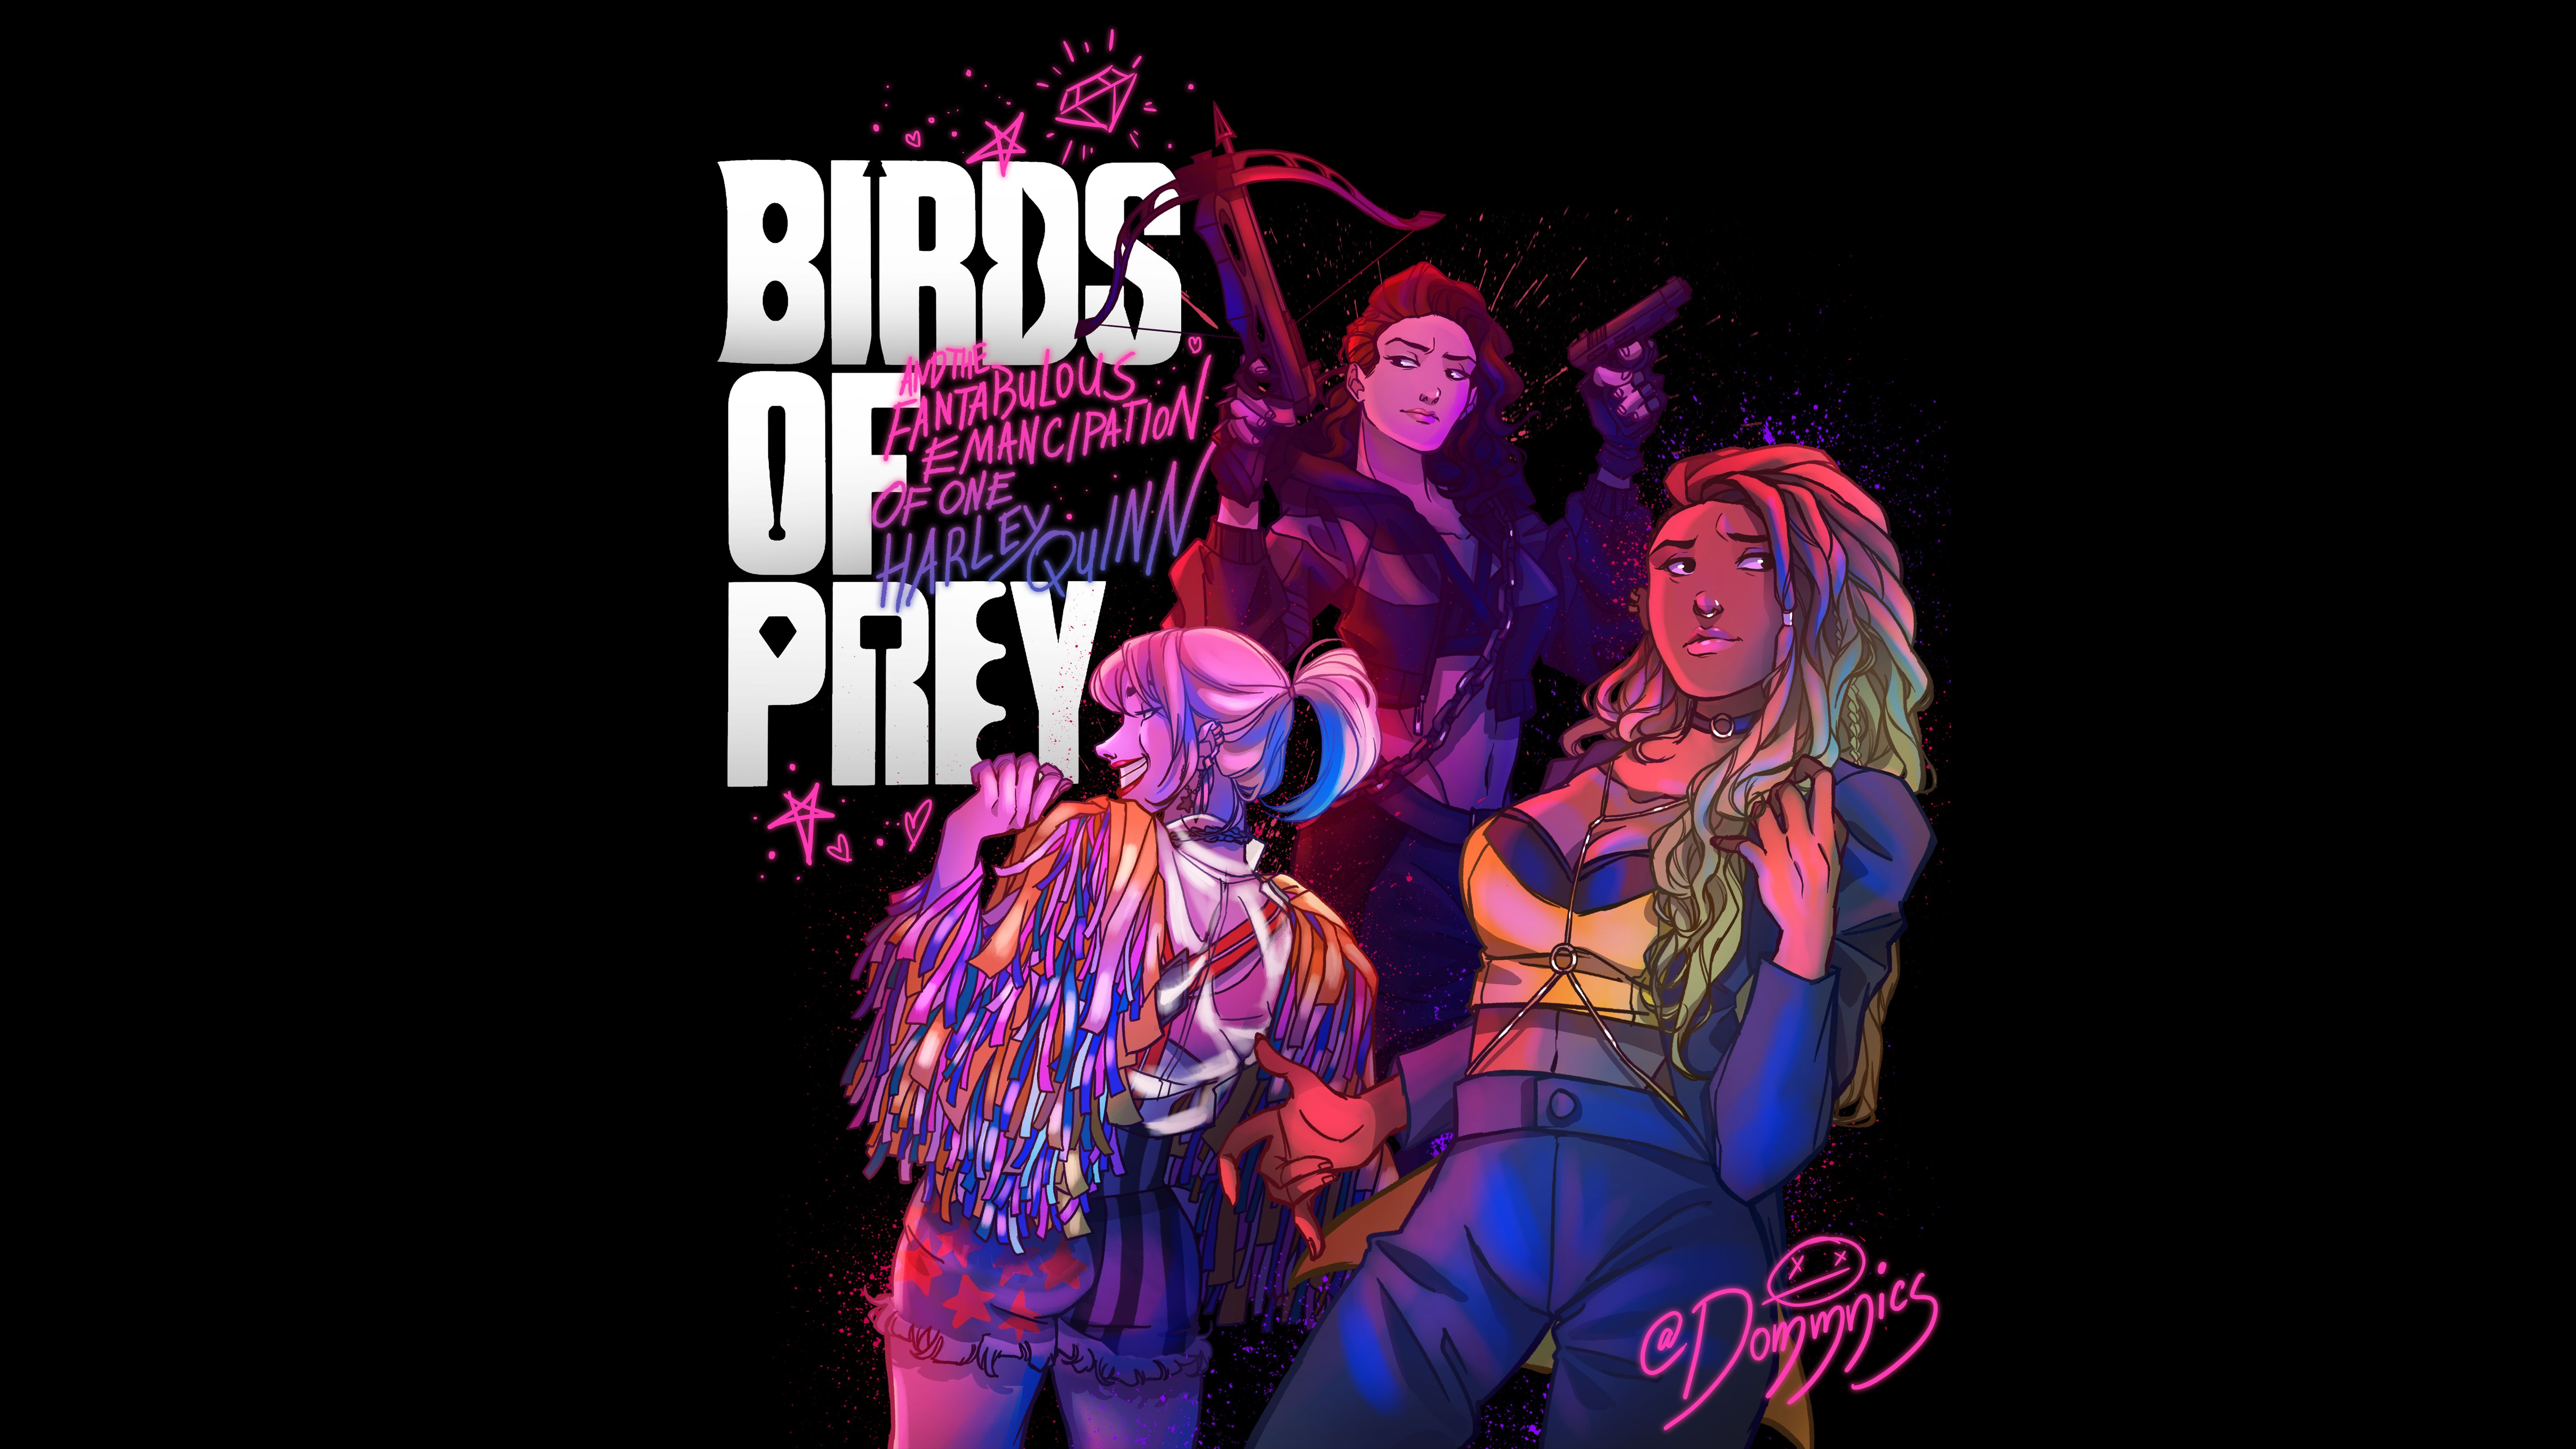 birds of prey (and the fantabulous emancipation of one harley quinn), movie, black canary, dc comics, dinah lance, harleen quinzel, harley quinn, helena bertinelli, huntress (dc comics) wallpaper for mobile